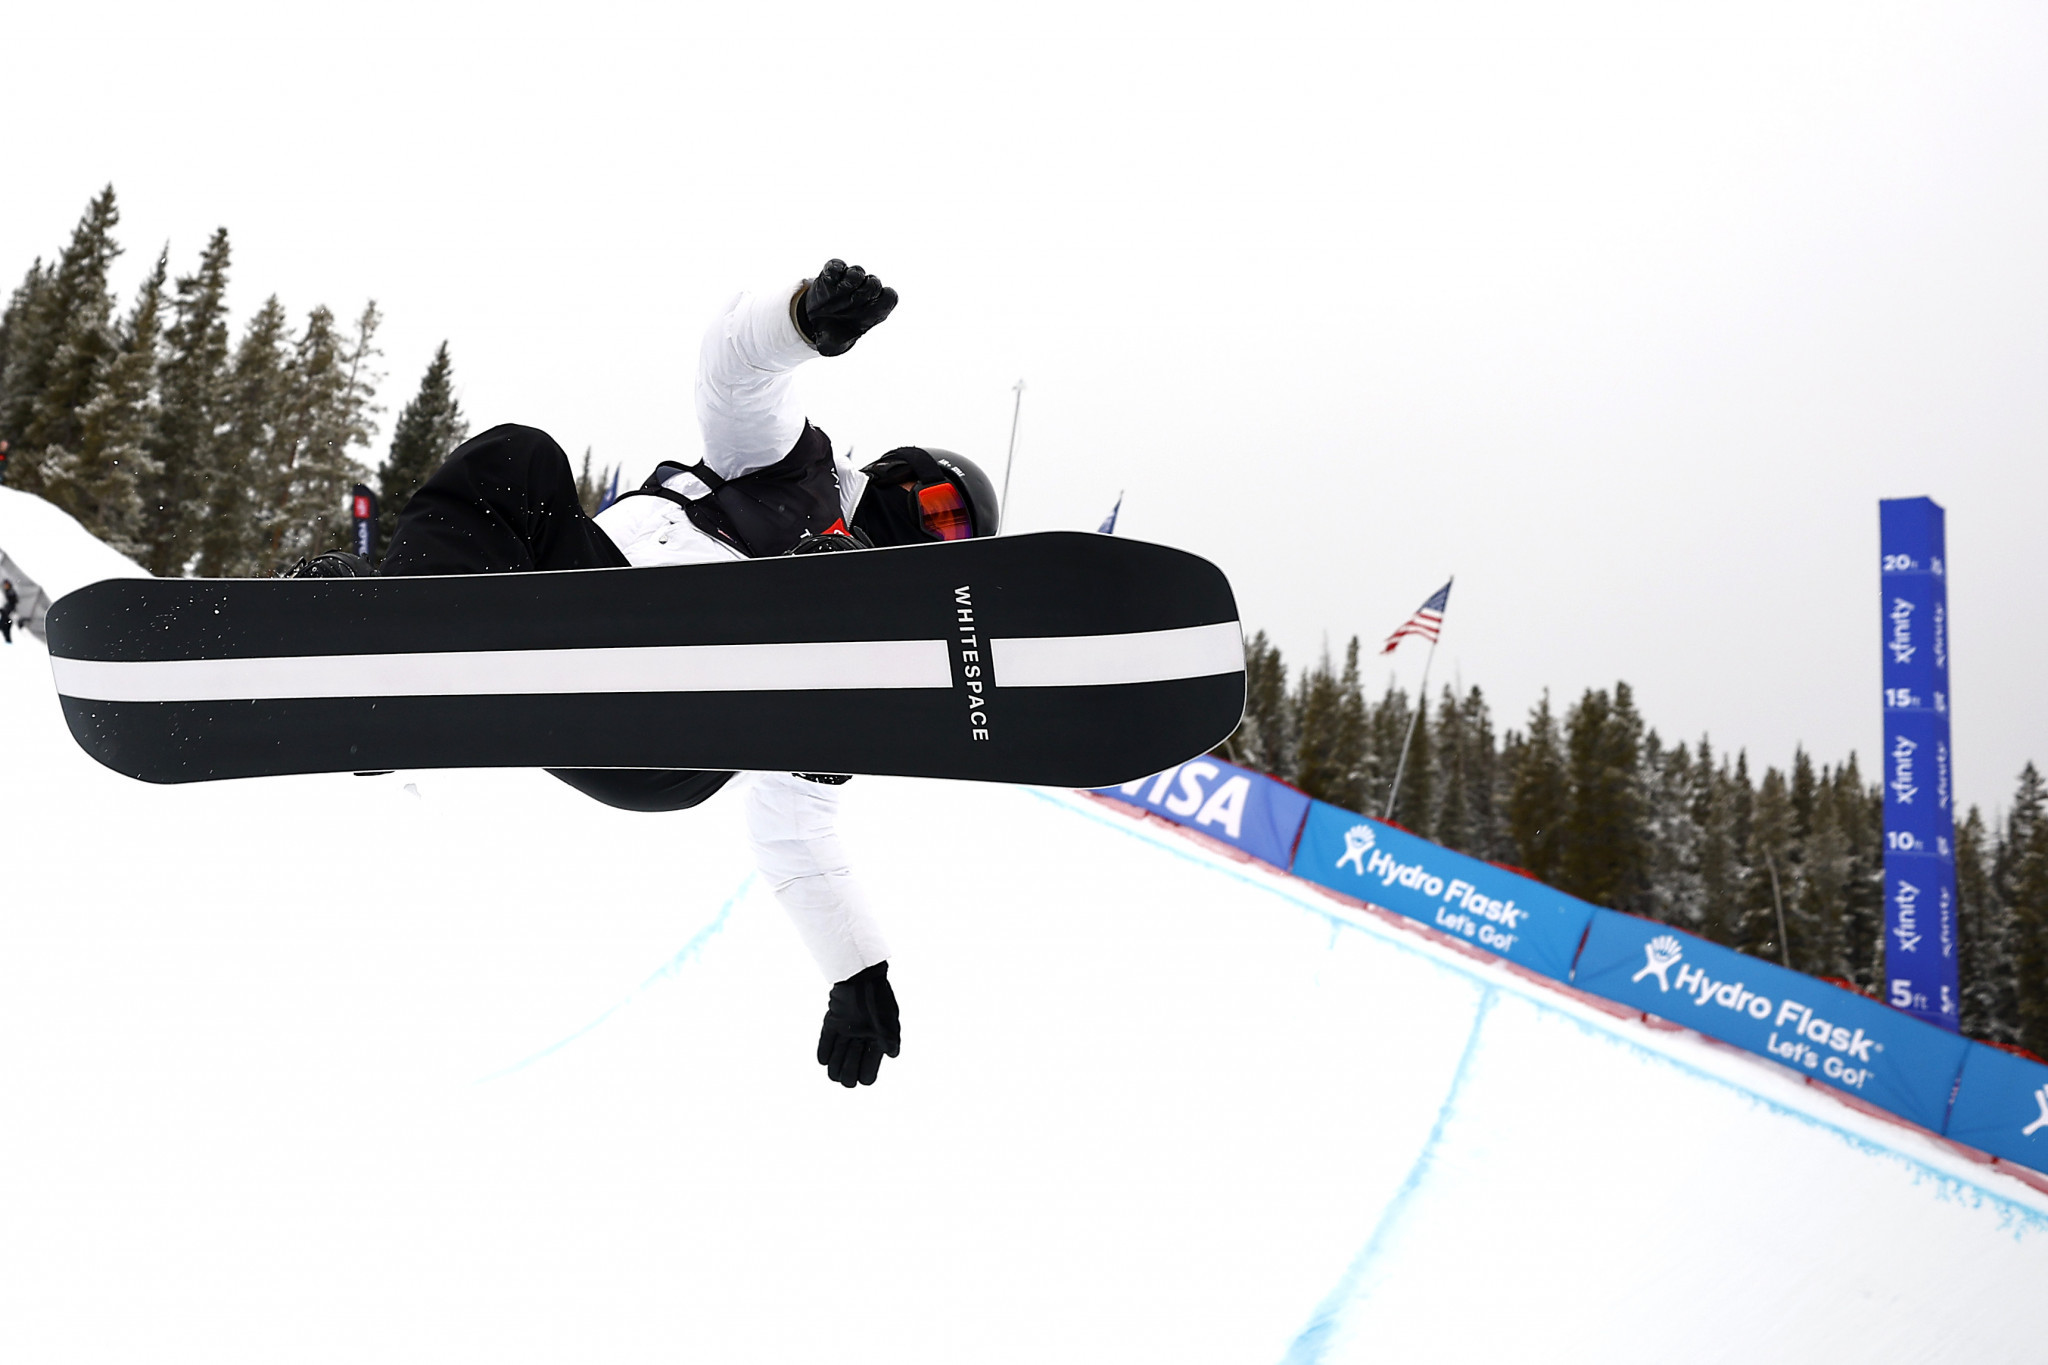 White reaches Snowboard World Cup final in Copper Mountain as Japanese dominate